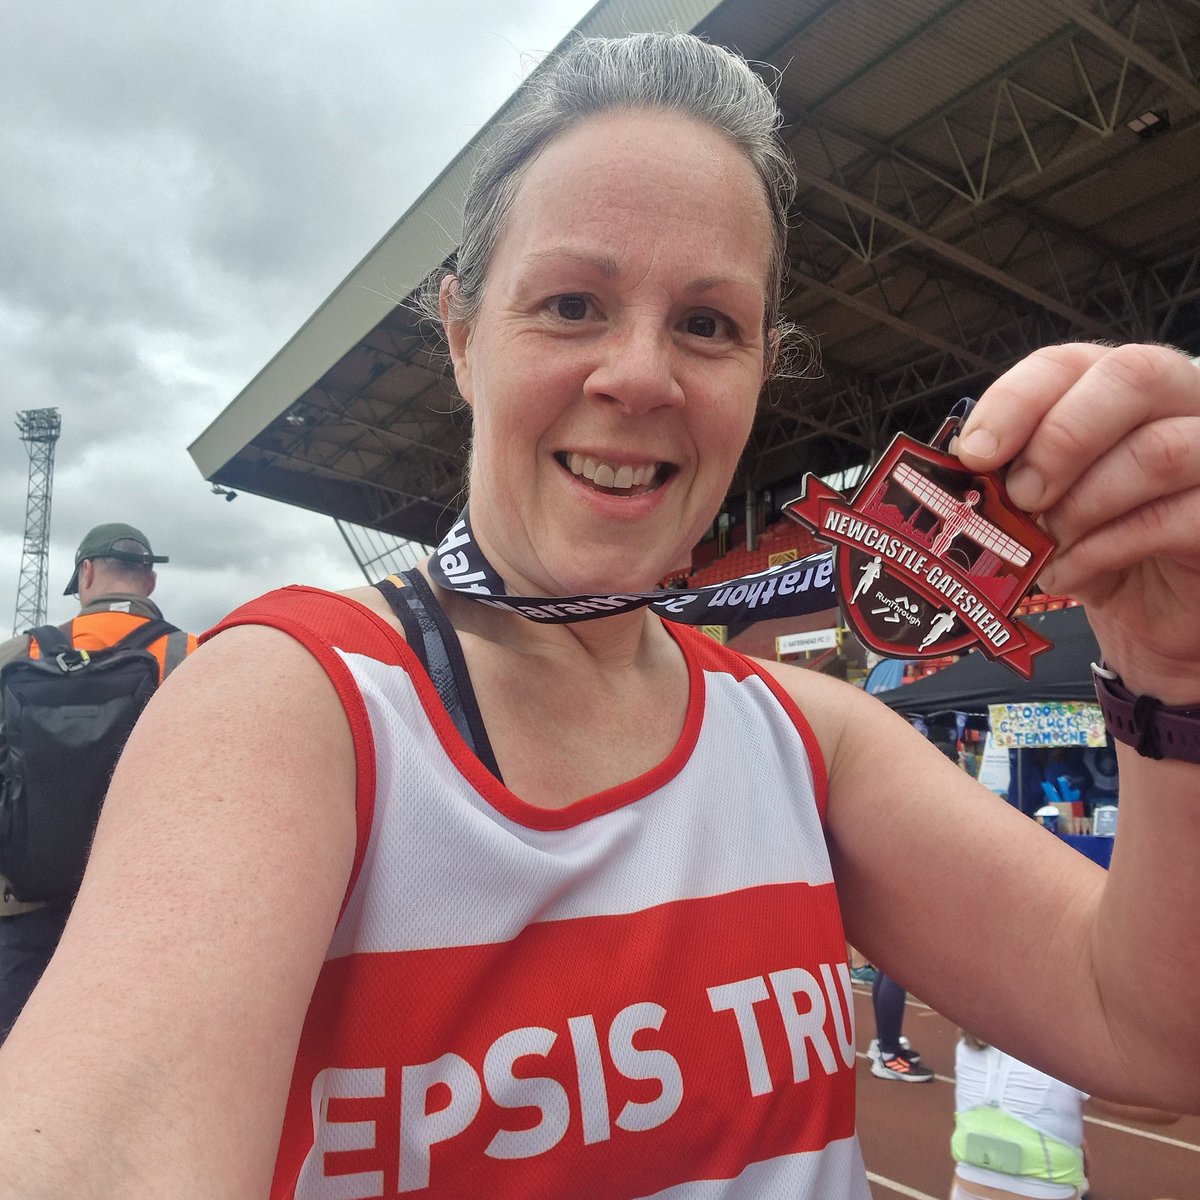 I'd like to say I enjoyed that but quite frankly it was awful 😂😂 however, Gateshead-Newcastle half marathon ✅️ all in memory of my amazong dad - for my amazing charity @UKSepsisTrust #sepsis #misshimeveryday #nearly50 #passmethewine